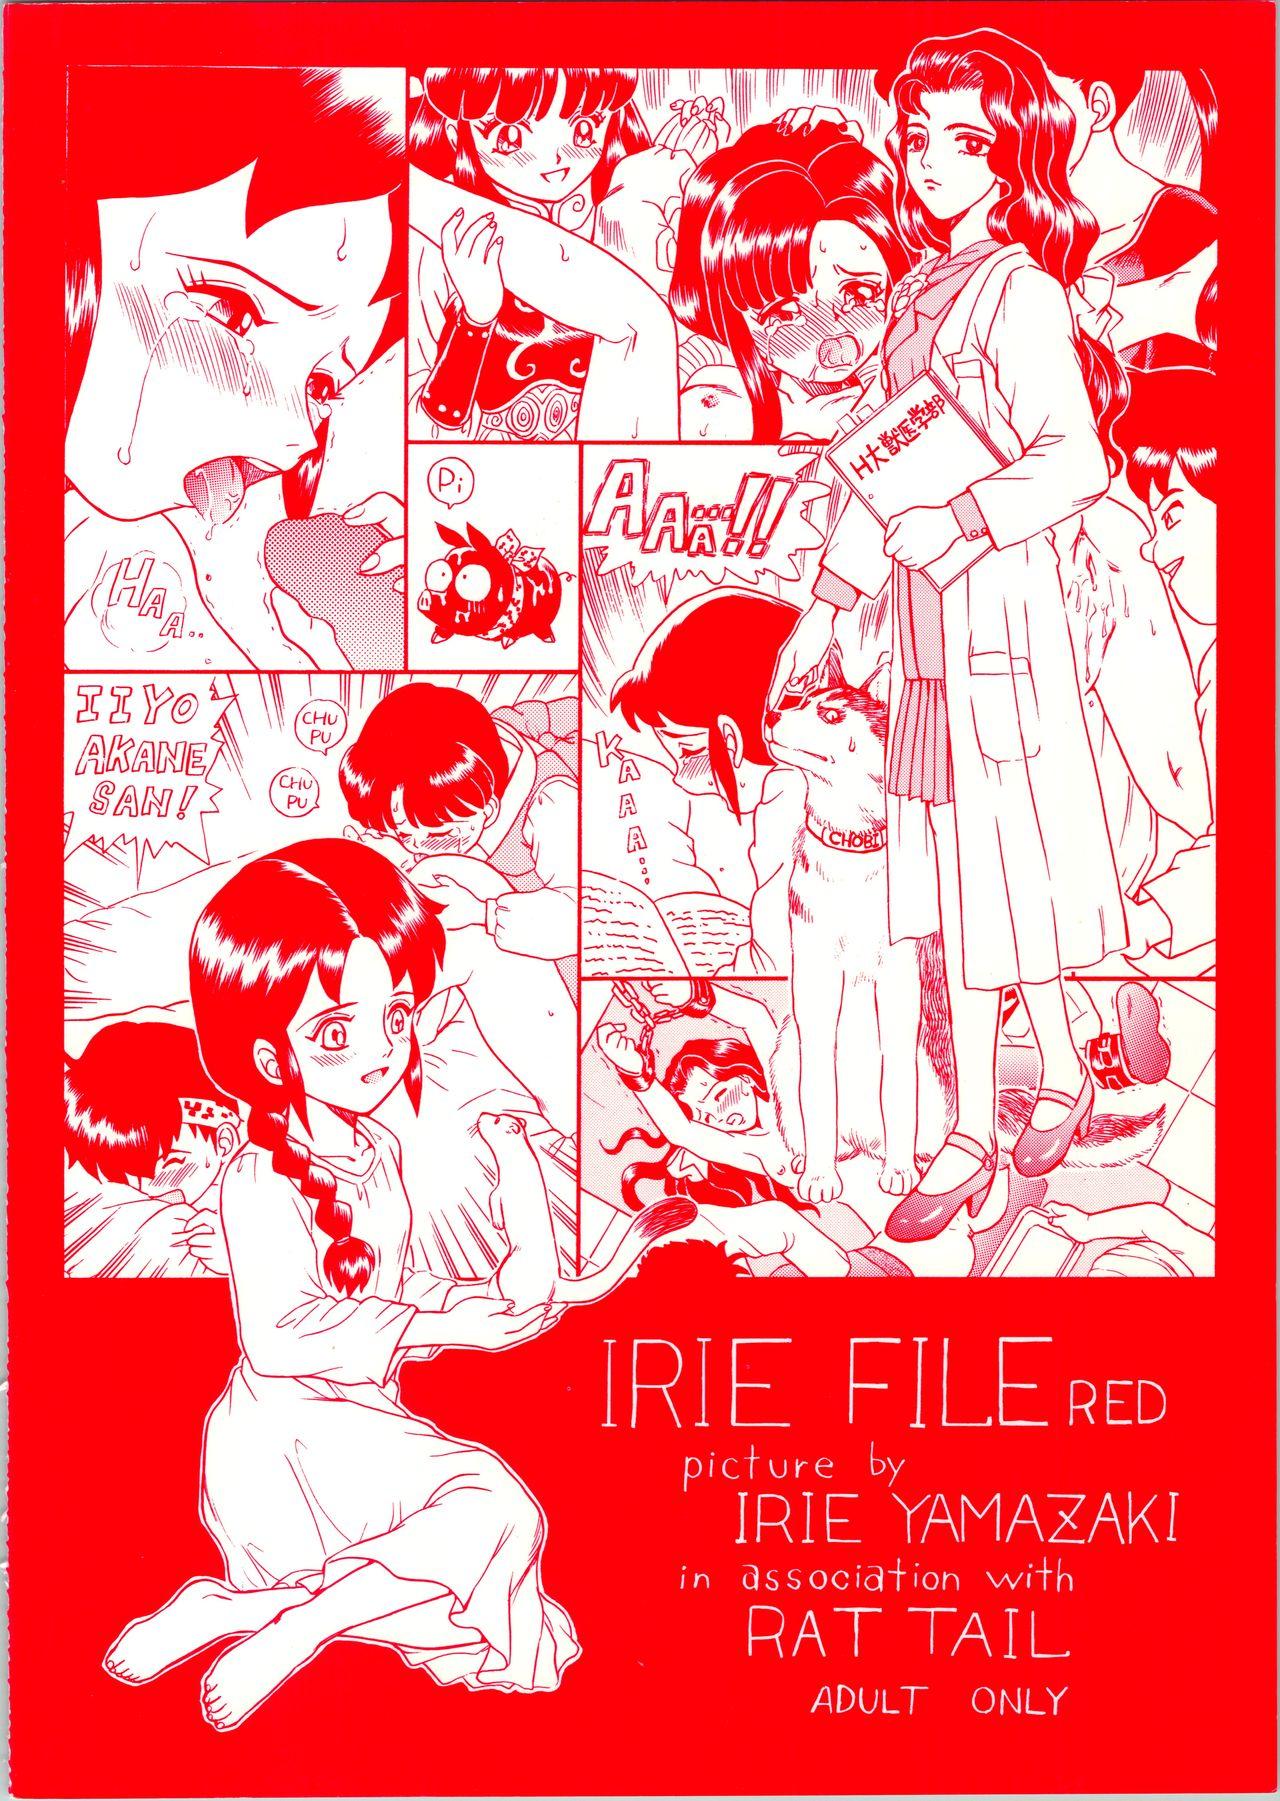 IRIE FILE RED 75